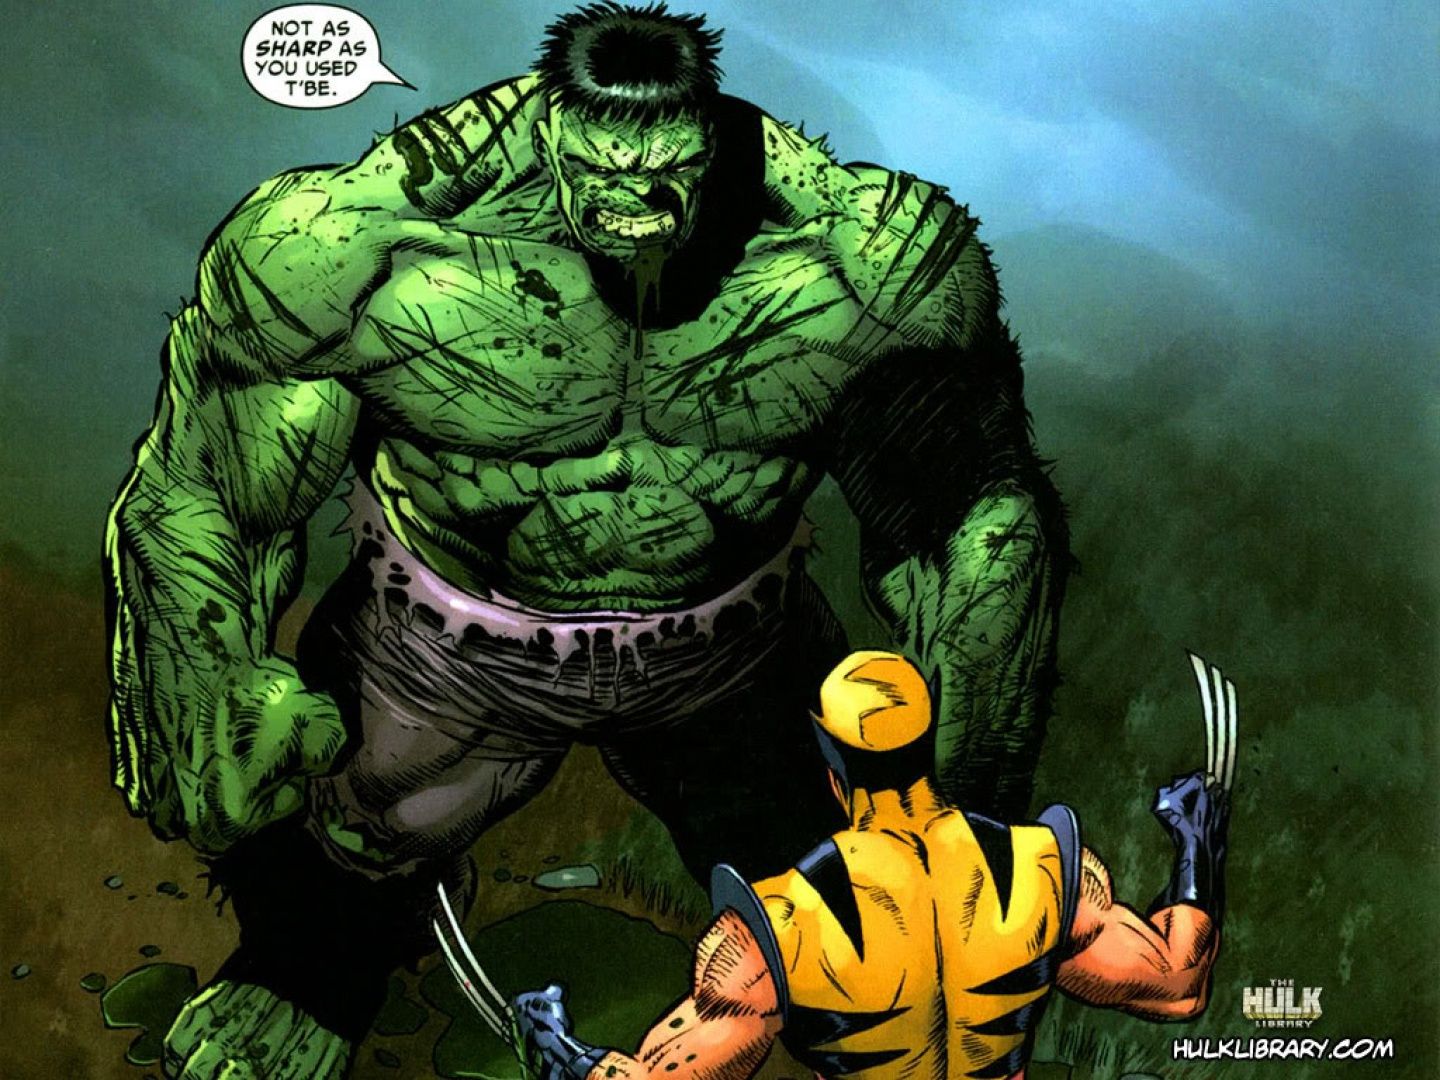 Free download HD Cartoon Wallpaper drawing superheroes and the hulk wolverine x [1440x1080] for your Desktop, Mobile & Tablet. Explore Hulk Cartoon Wallpaper. Hulk Cartoon Wallpaper, Hulk Wallpaper, Hulk